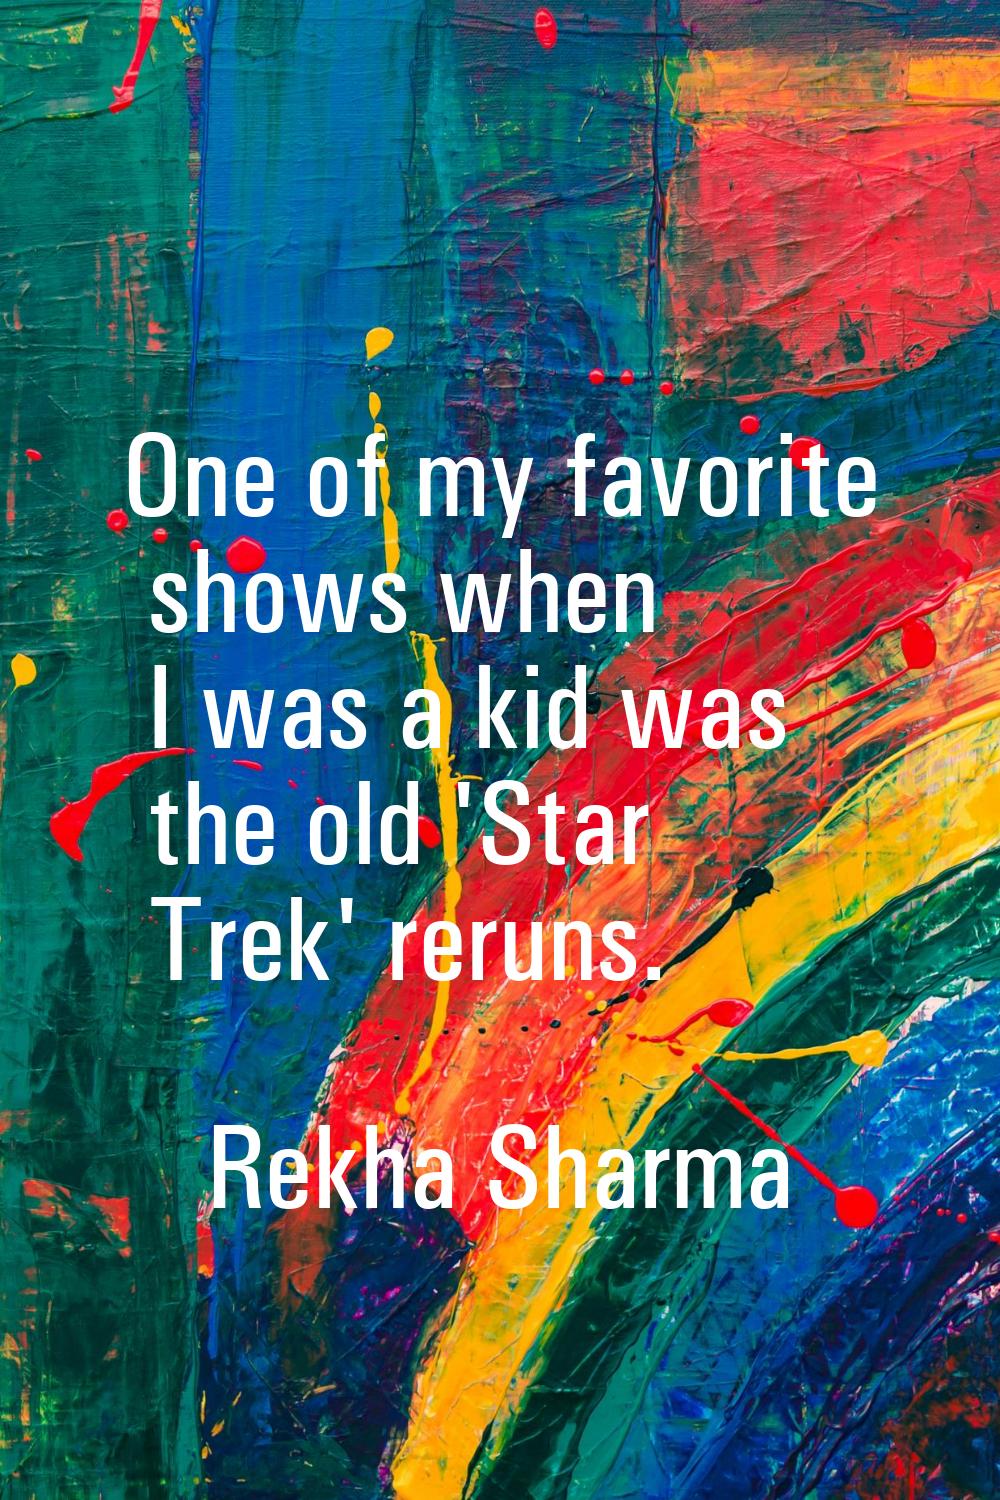 One of my favorite shows when I was a kid was the old 'Star Trek' reruns.